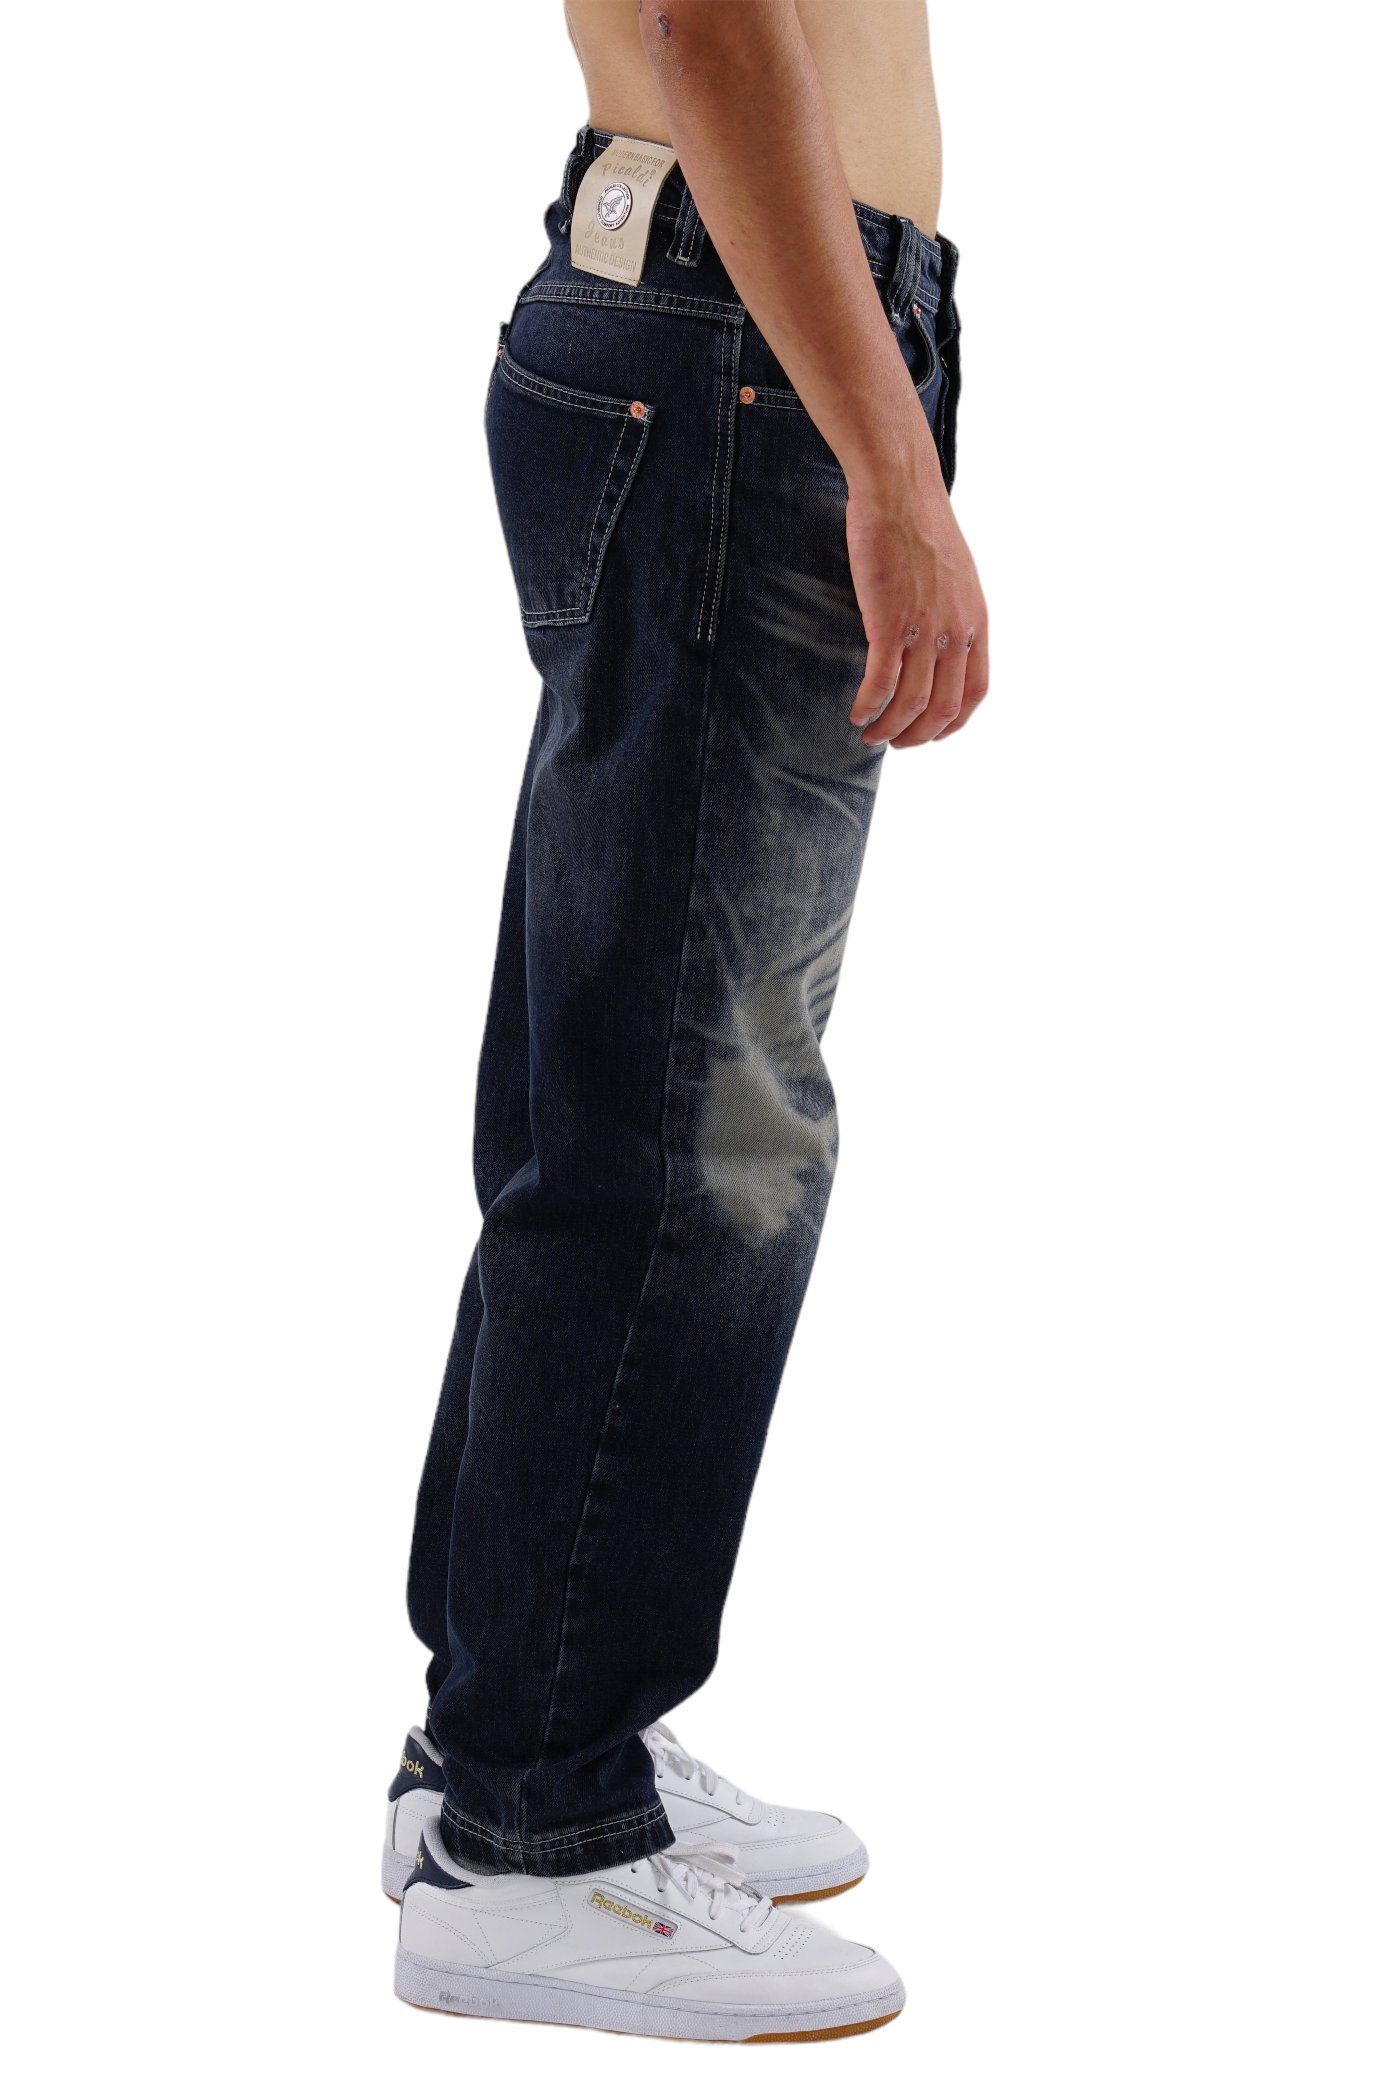 Zicco Jeans Jeans Weite Loose Fit Eldorado Relaxed PICALDI 472 Fit,